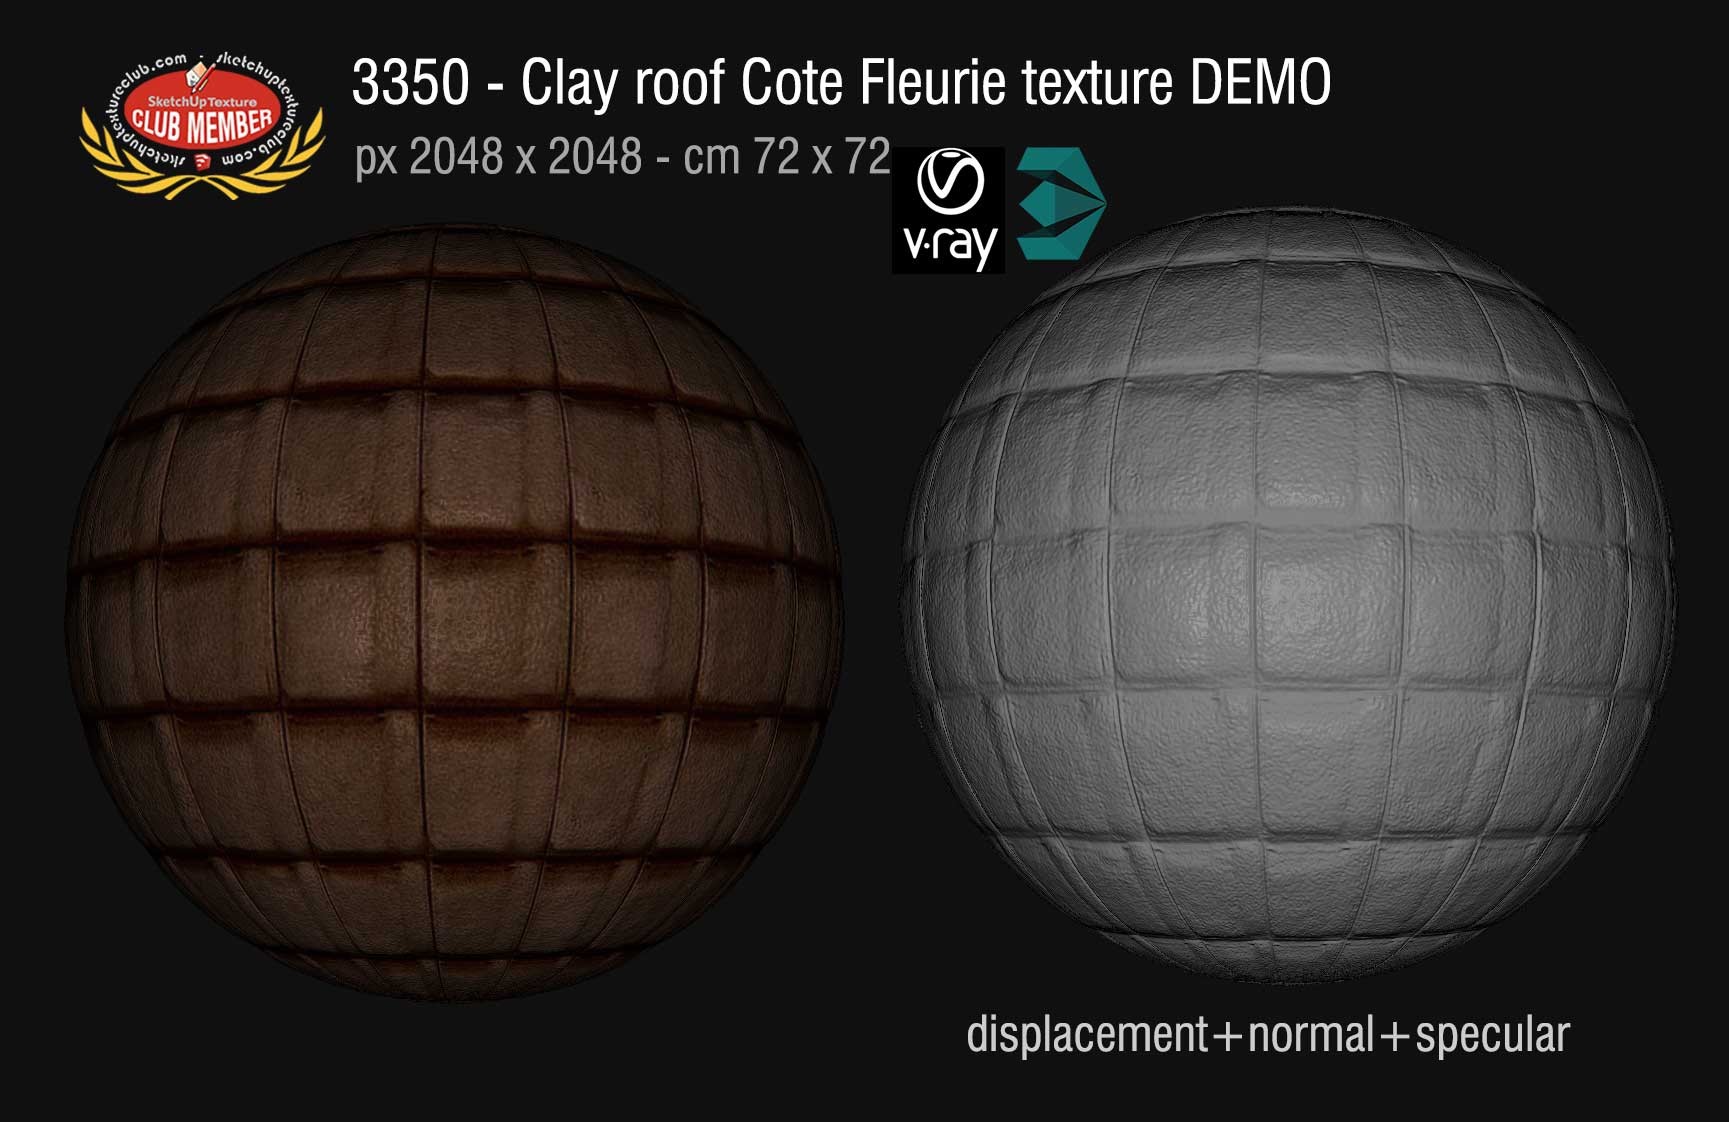 03350 Clay roofing Cote Fleurie texture + maps DEMO